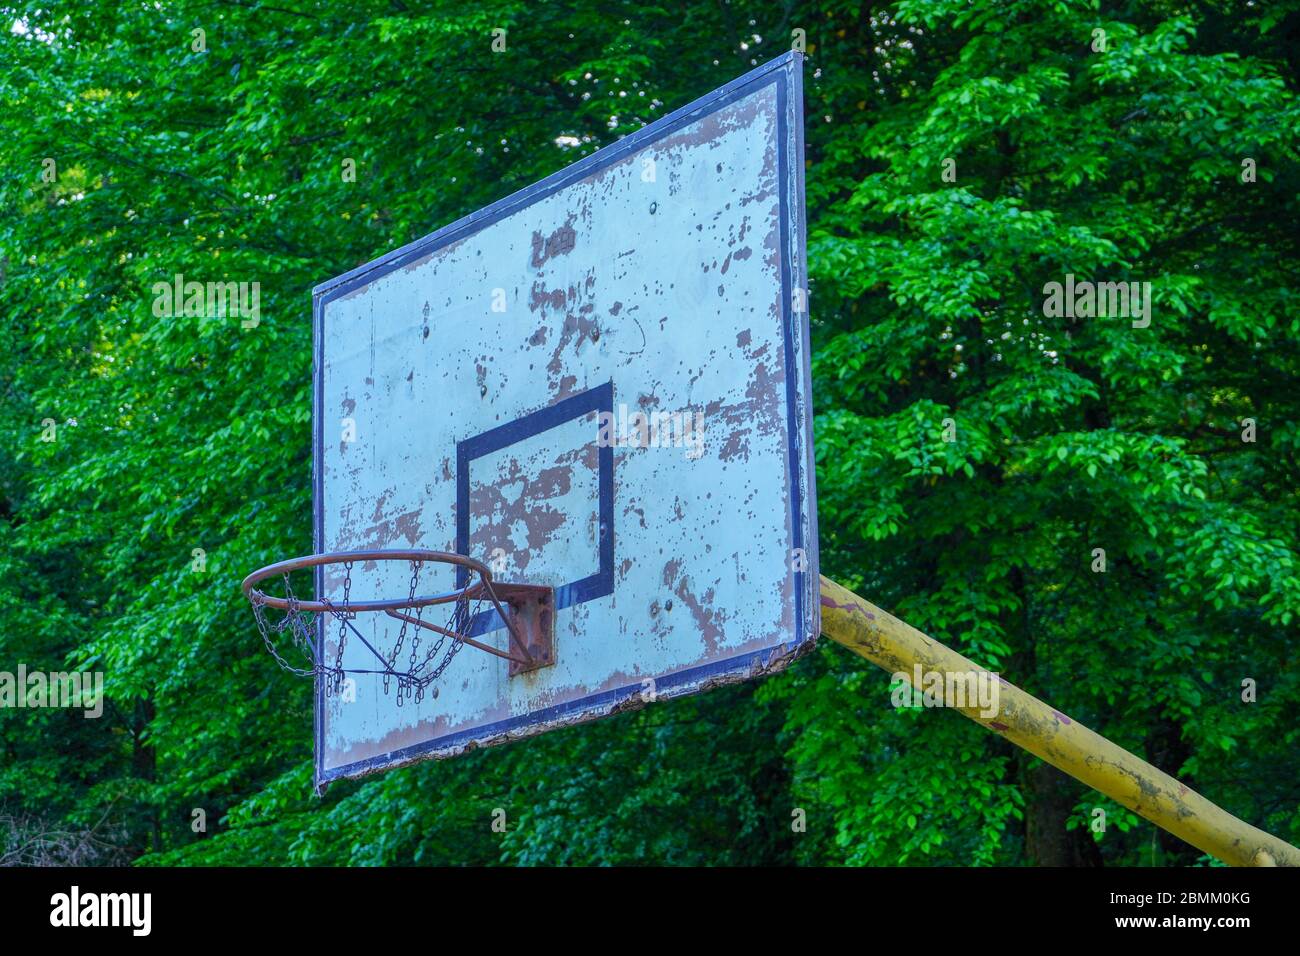 Old basketball hoop in the park with green trees as background. Stock Photo